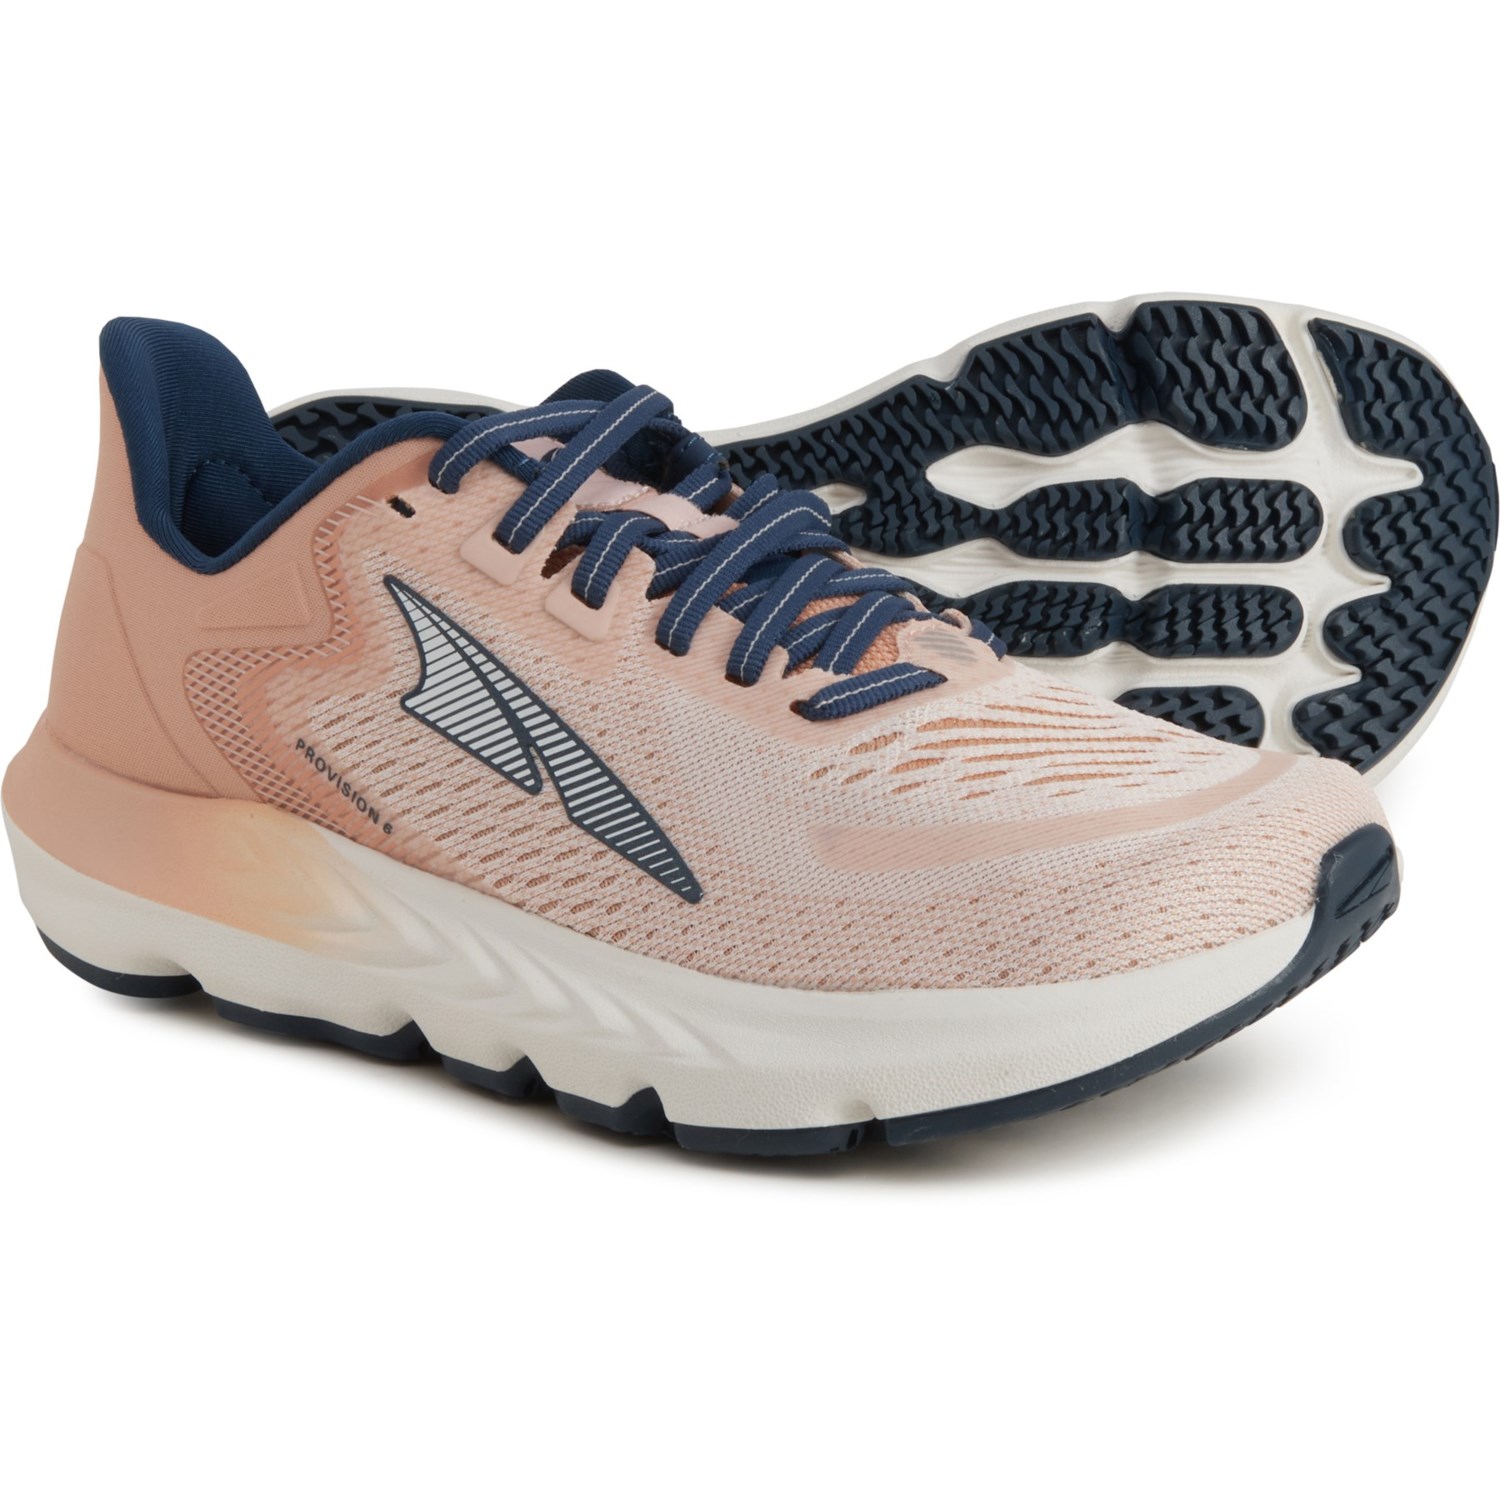 Altra Provision 6 Running Shoes (For Women) - Save 69%